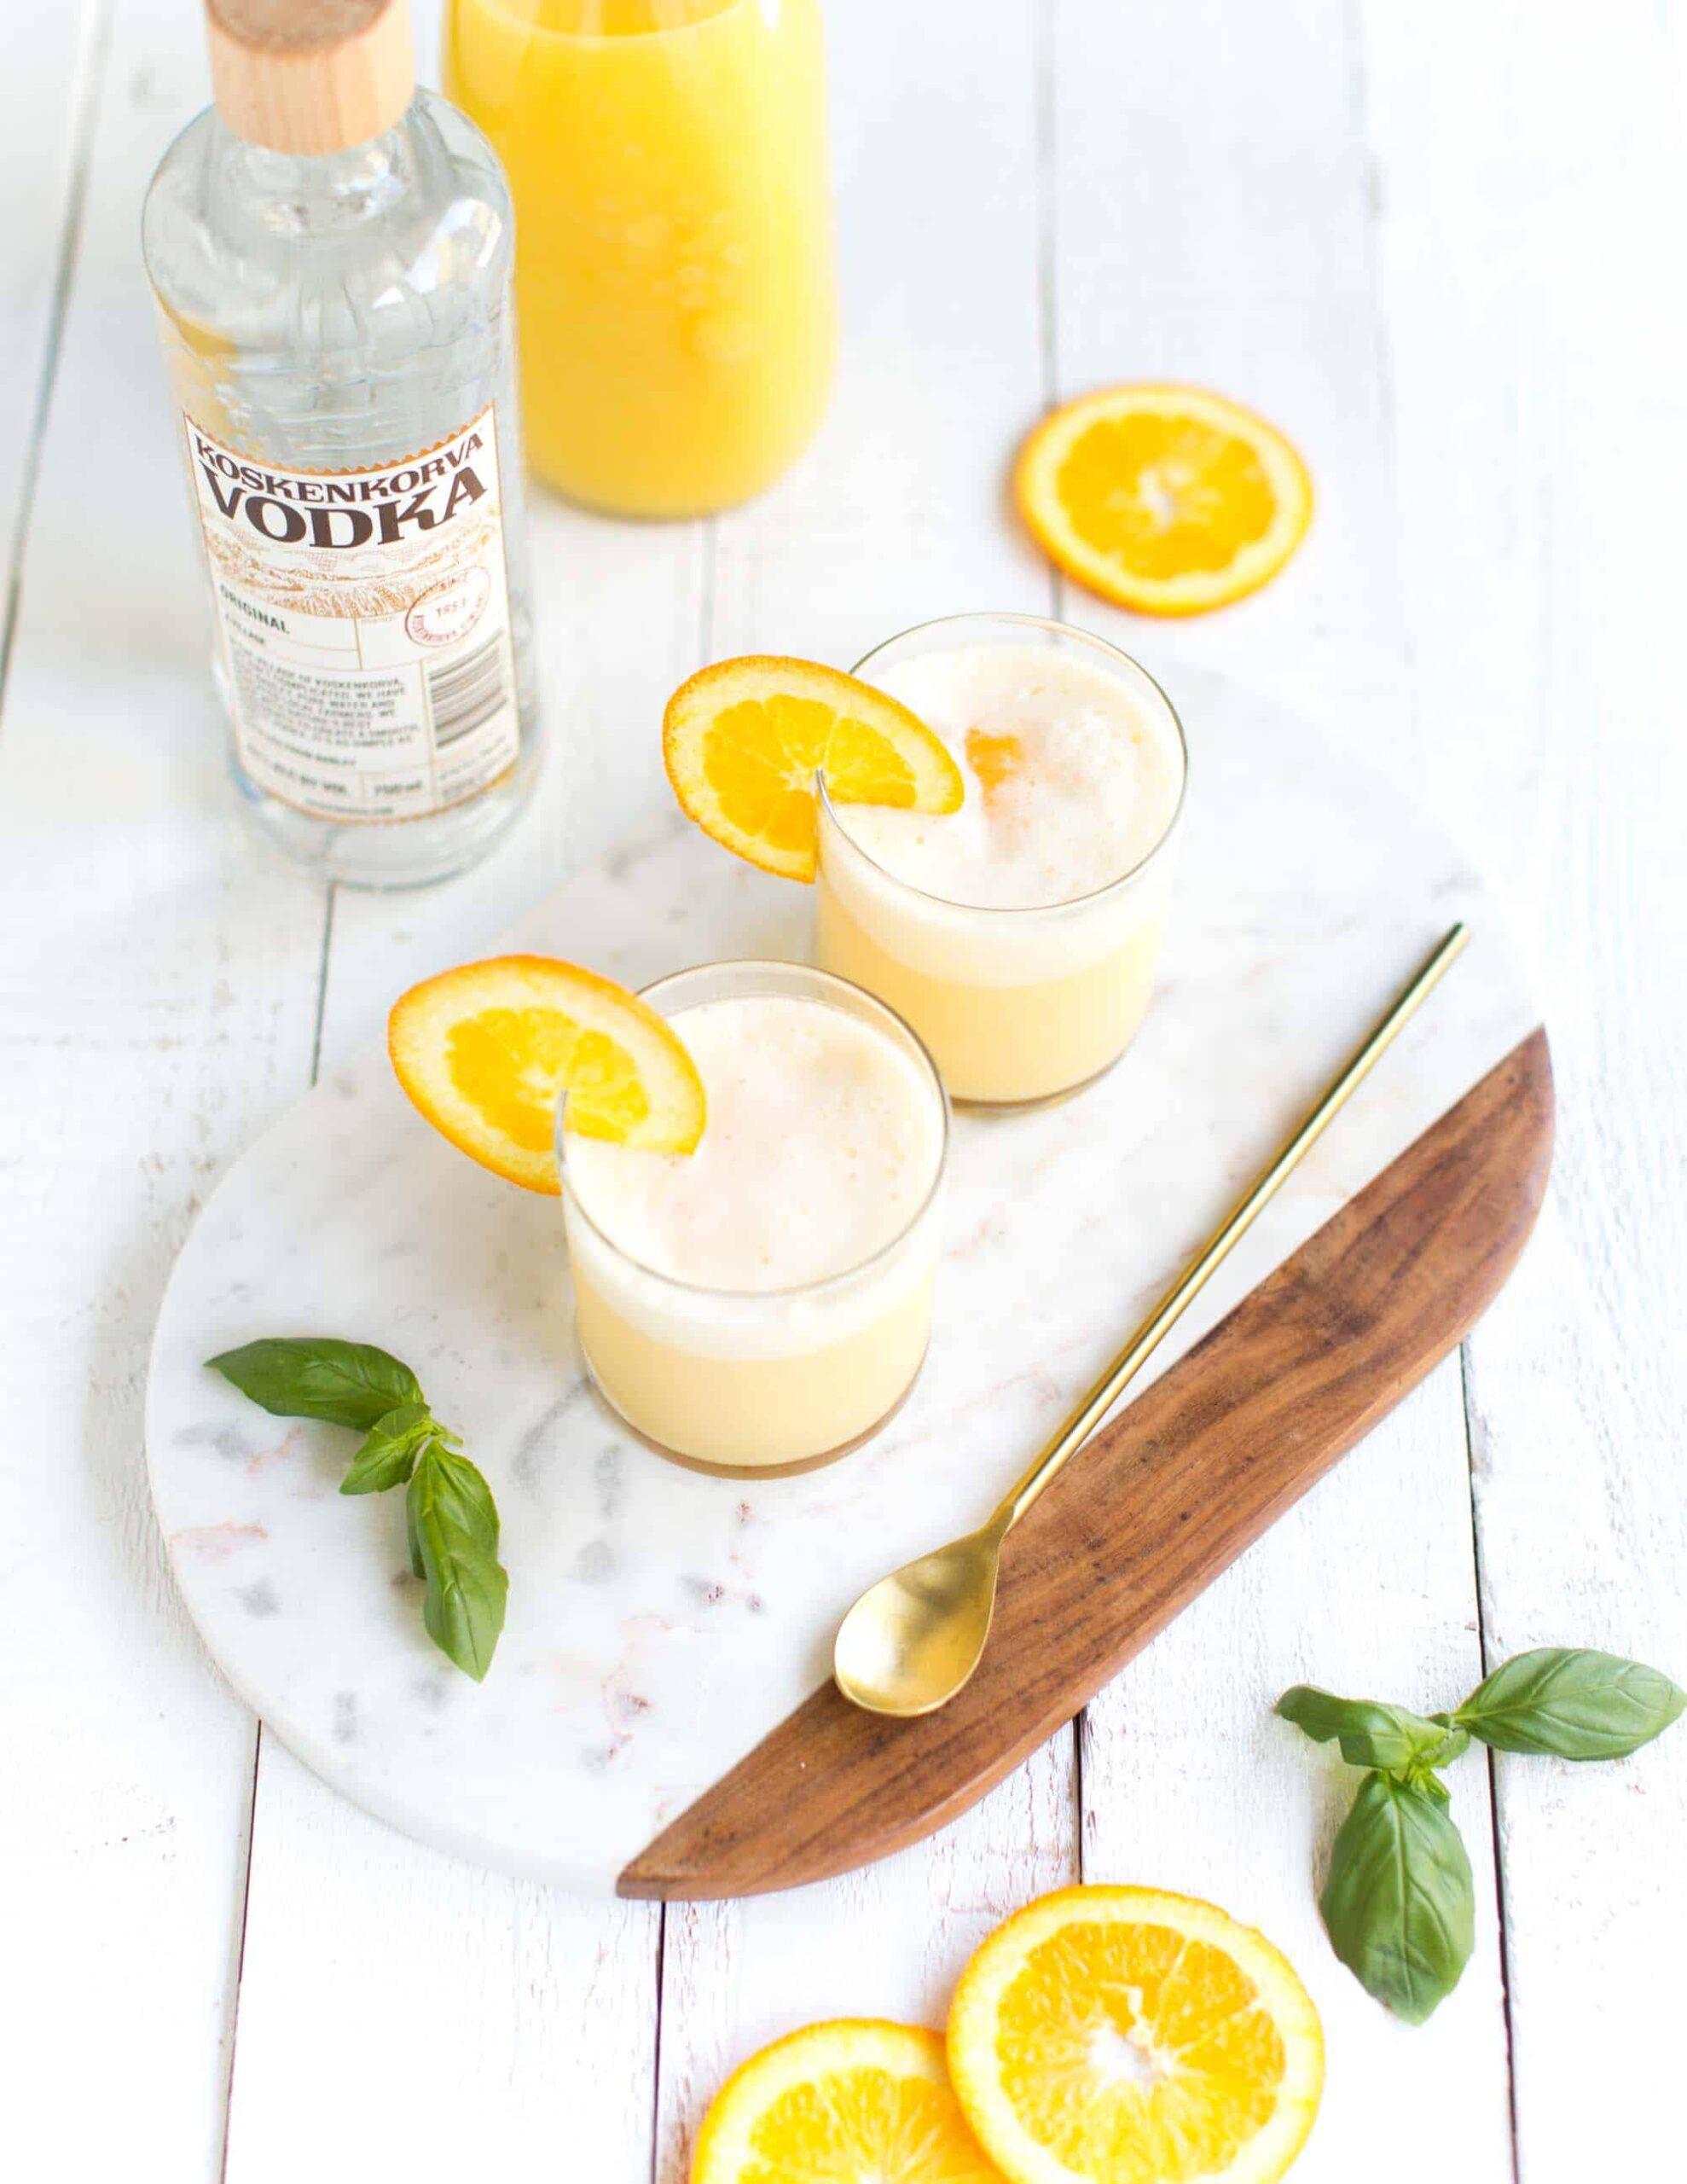 Vegan Drinks and Orange Creamsicle Cocktails with Coconut Milk